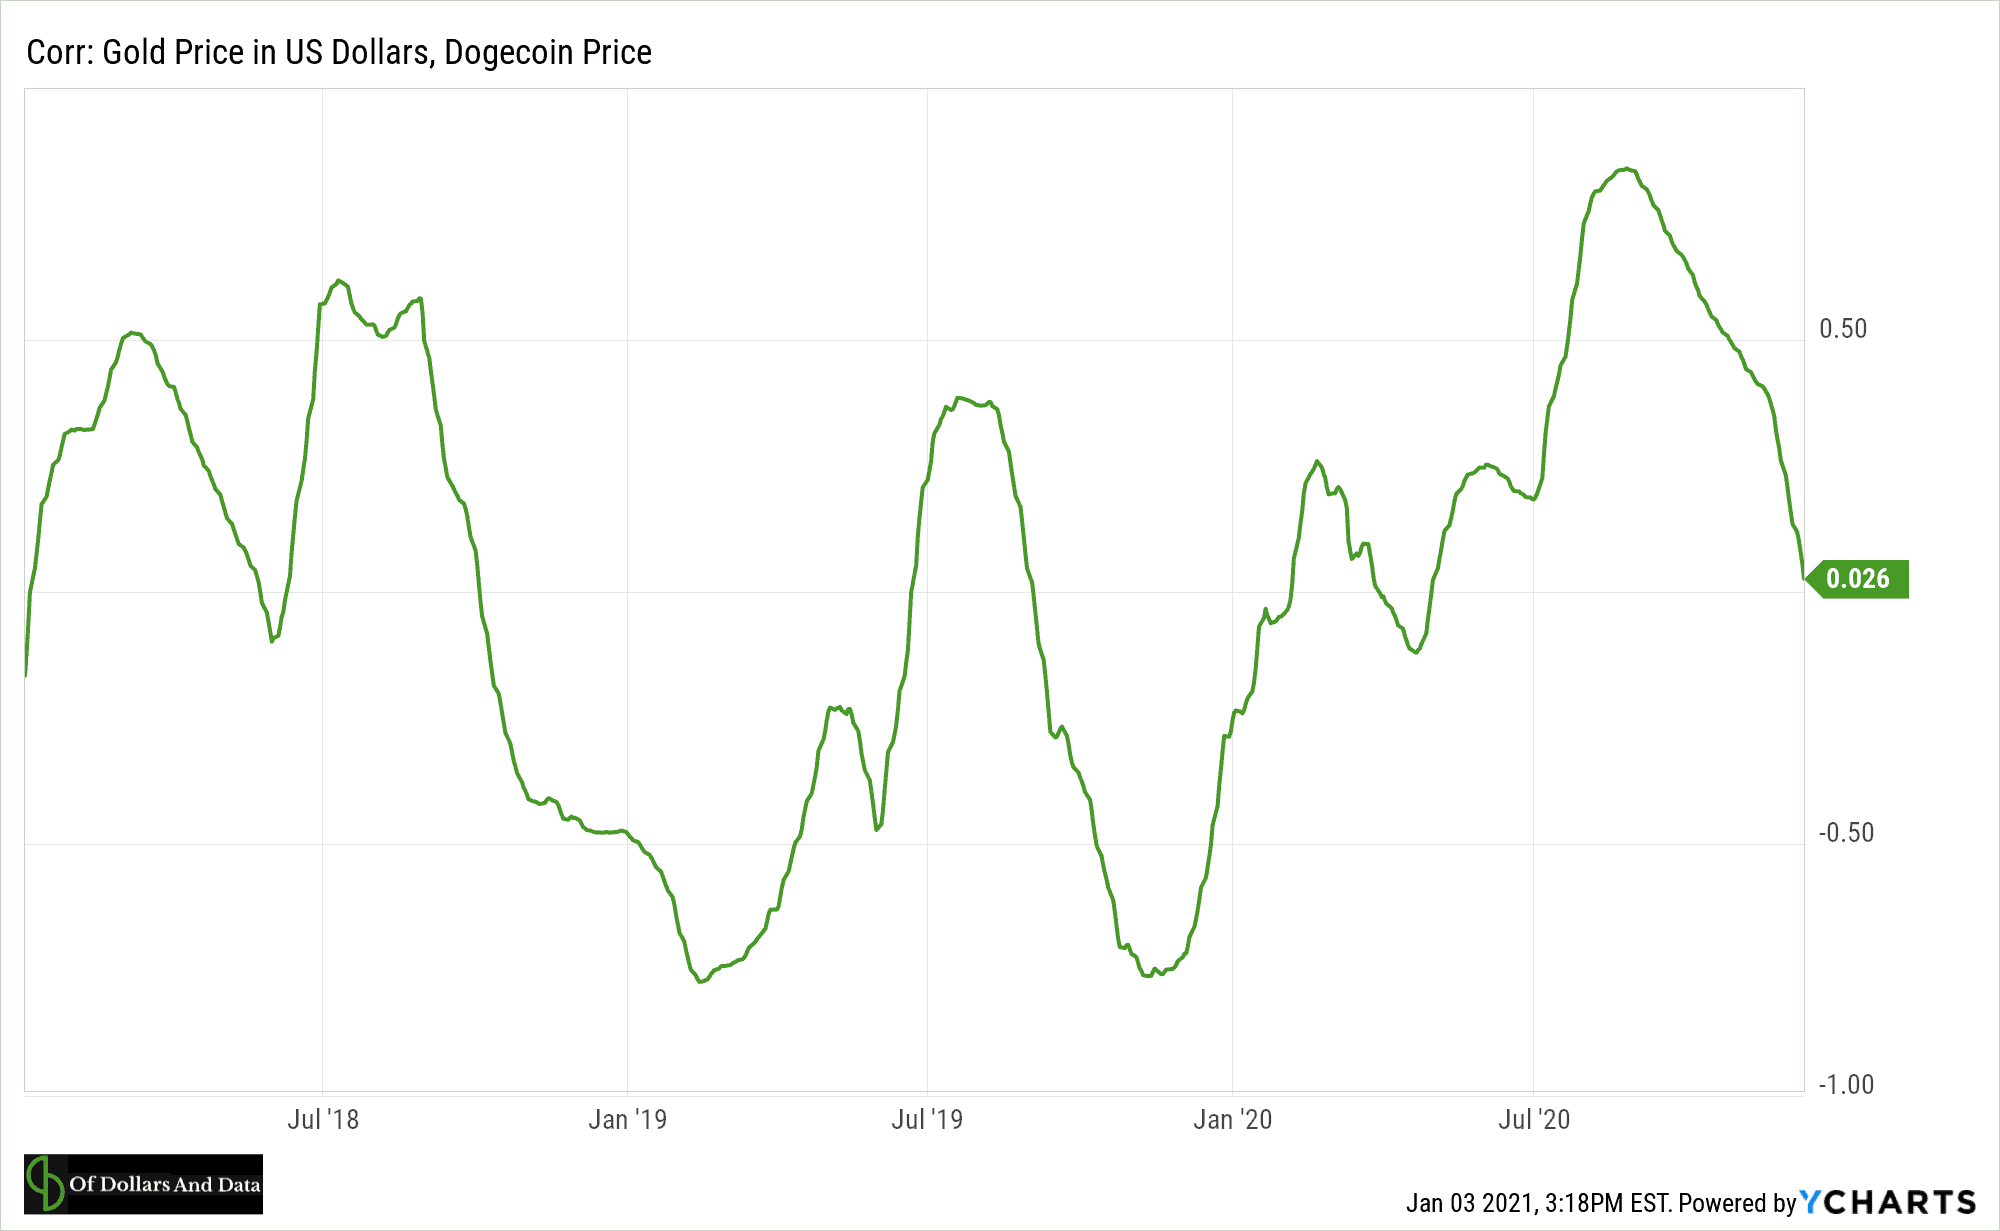 Correlation between Gold's price and Dogecoin's price from 2018 to 2020.